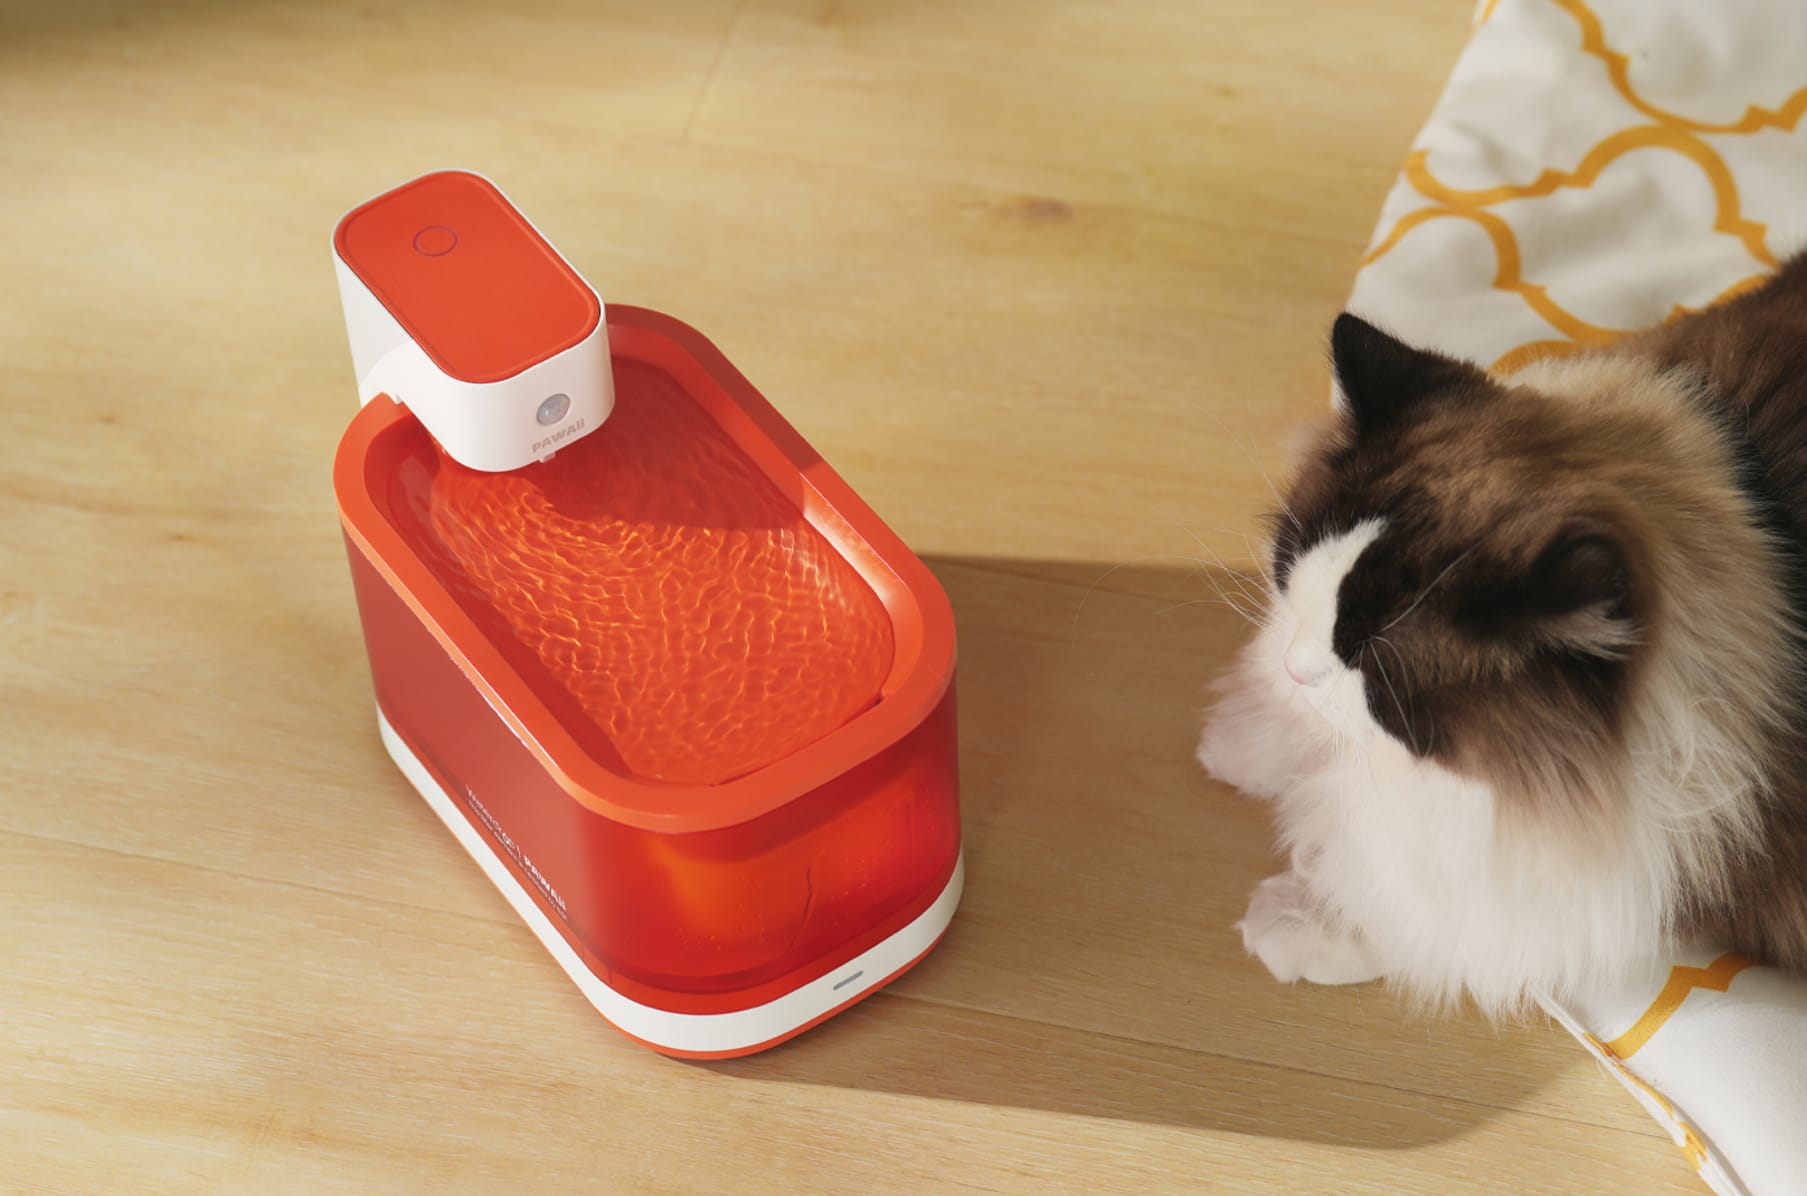 Pawaii's Caremi Mobile Smart Pet Fountain is now on Indiegogo! See